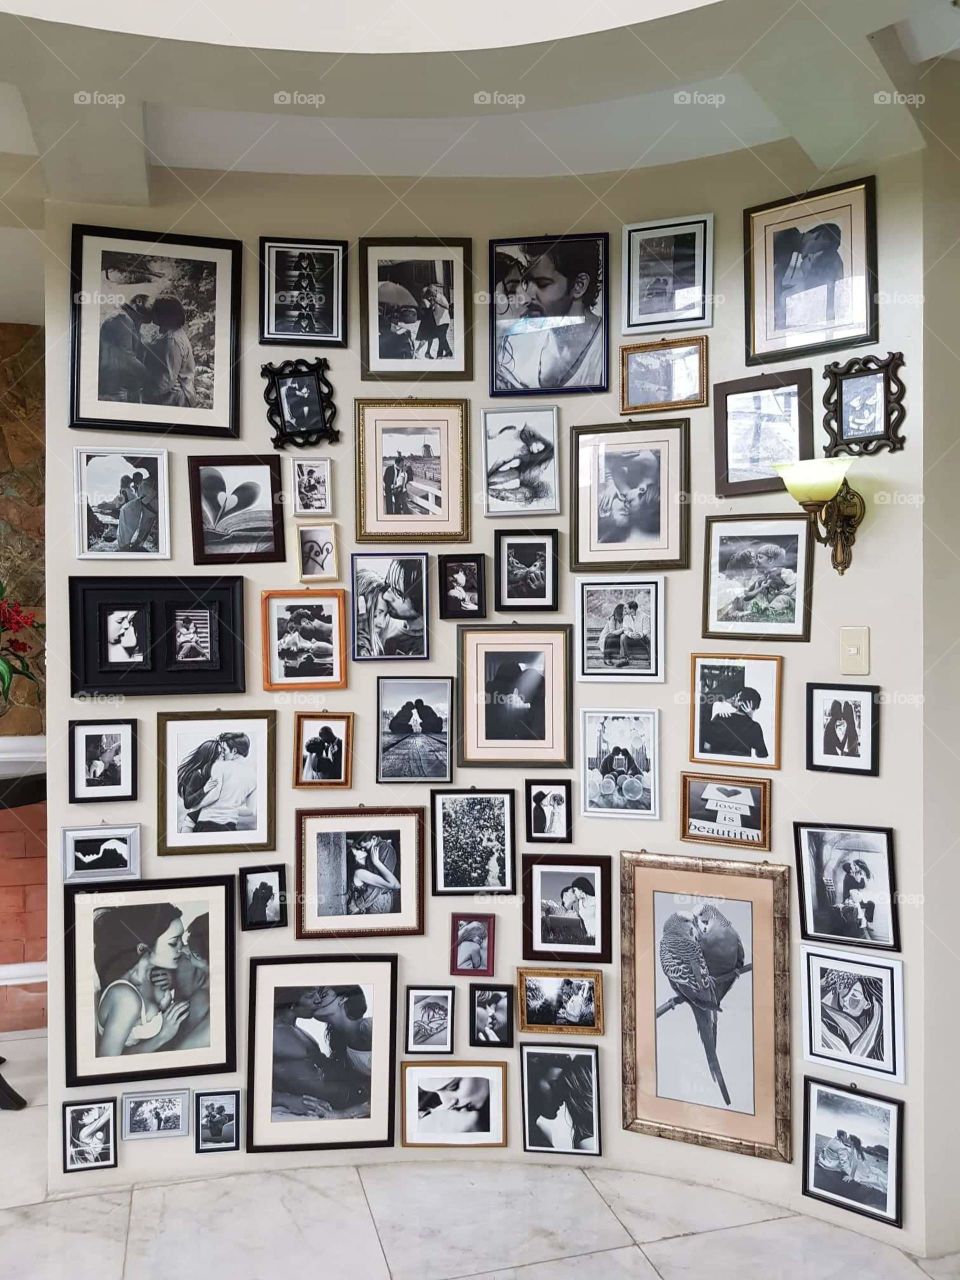 Collections of amazing photographs with frames pinned on wall. All those framed arts express love and affection.